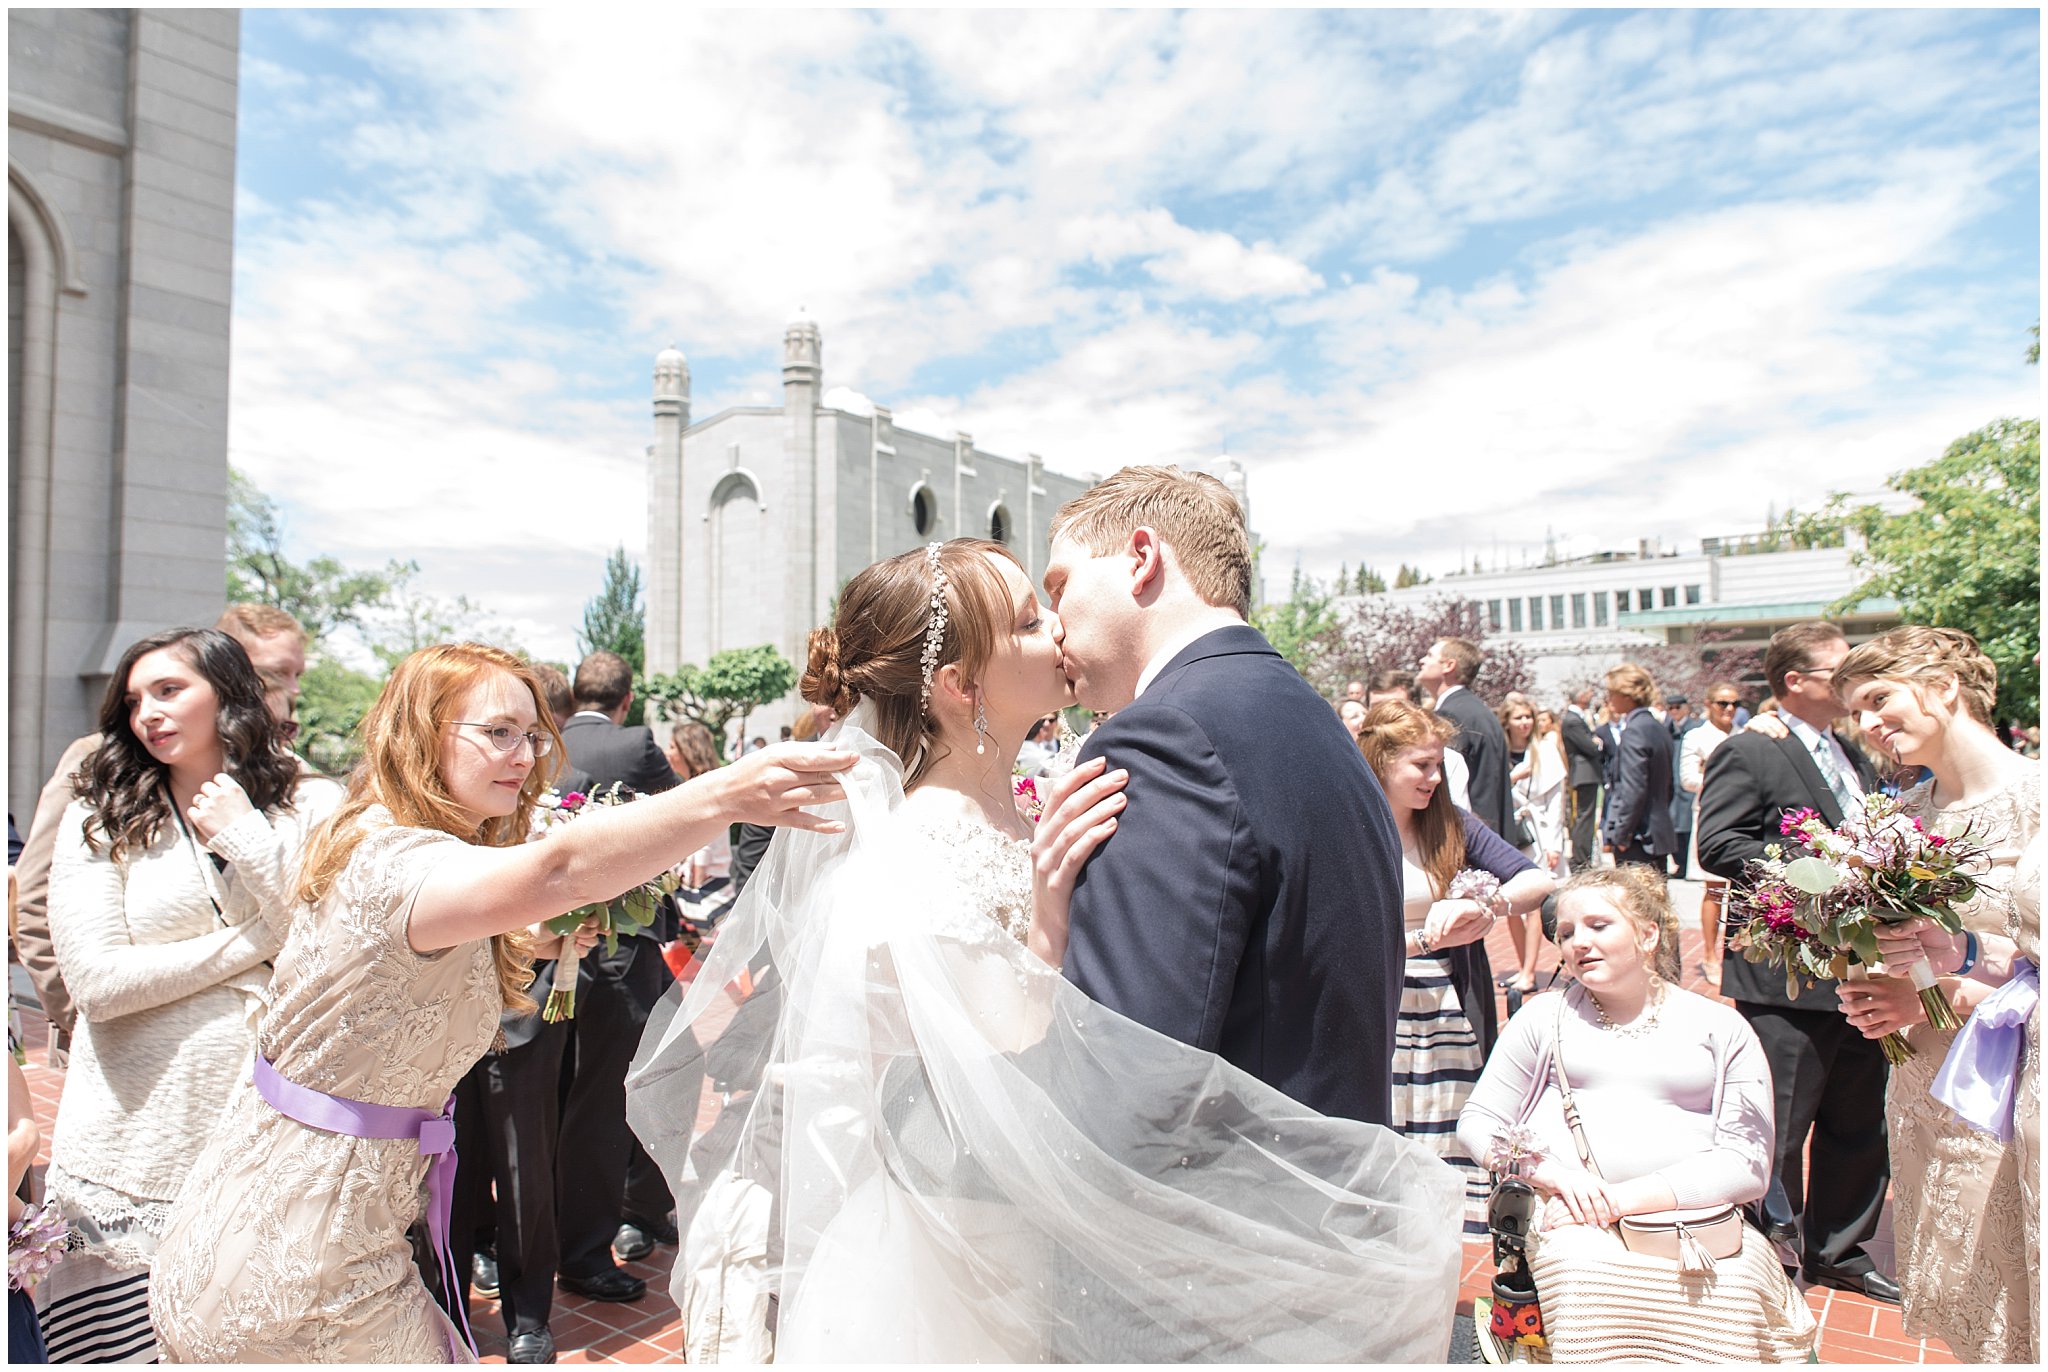 Bride and groom exit from Salt Lake Temple kiss | Candid wedding photography | Jessie and Dallin Photography